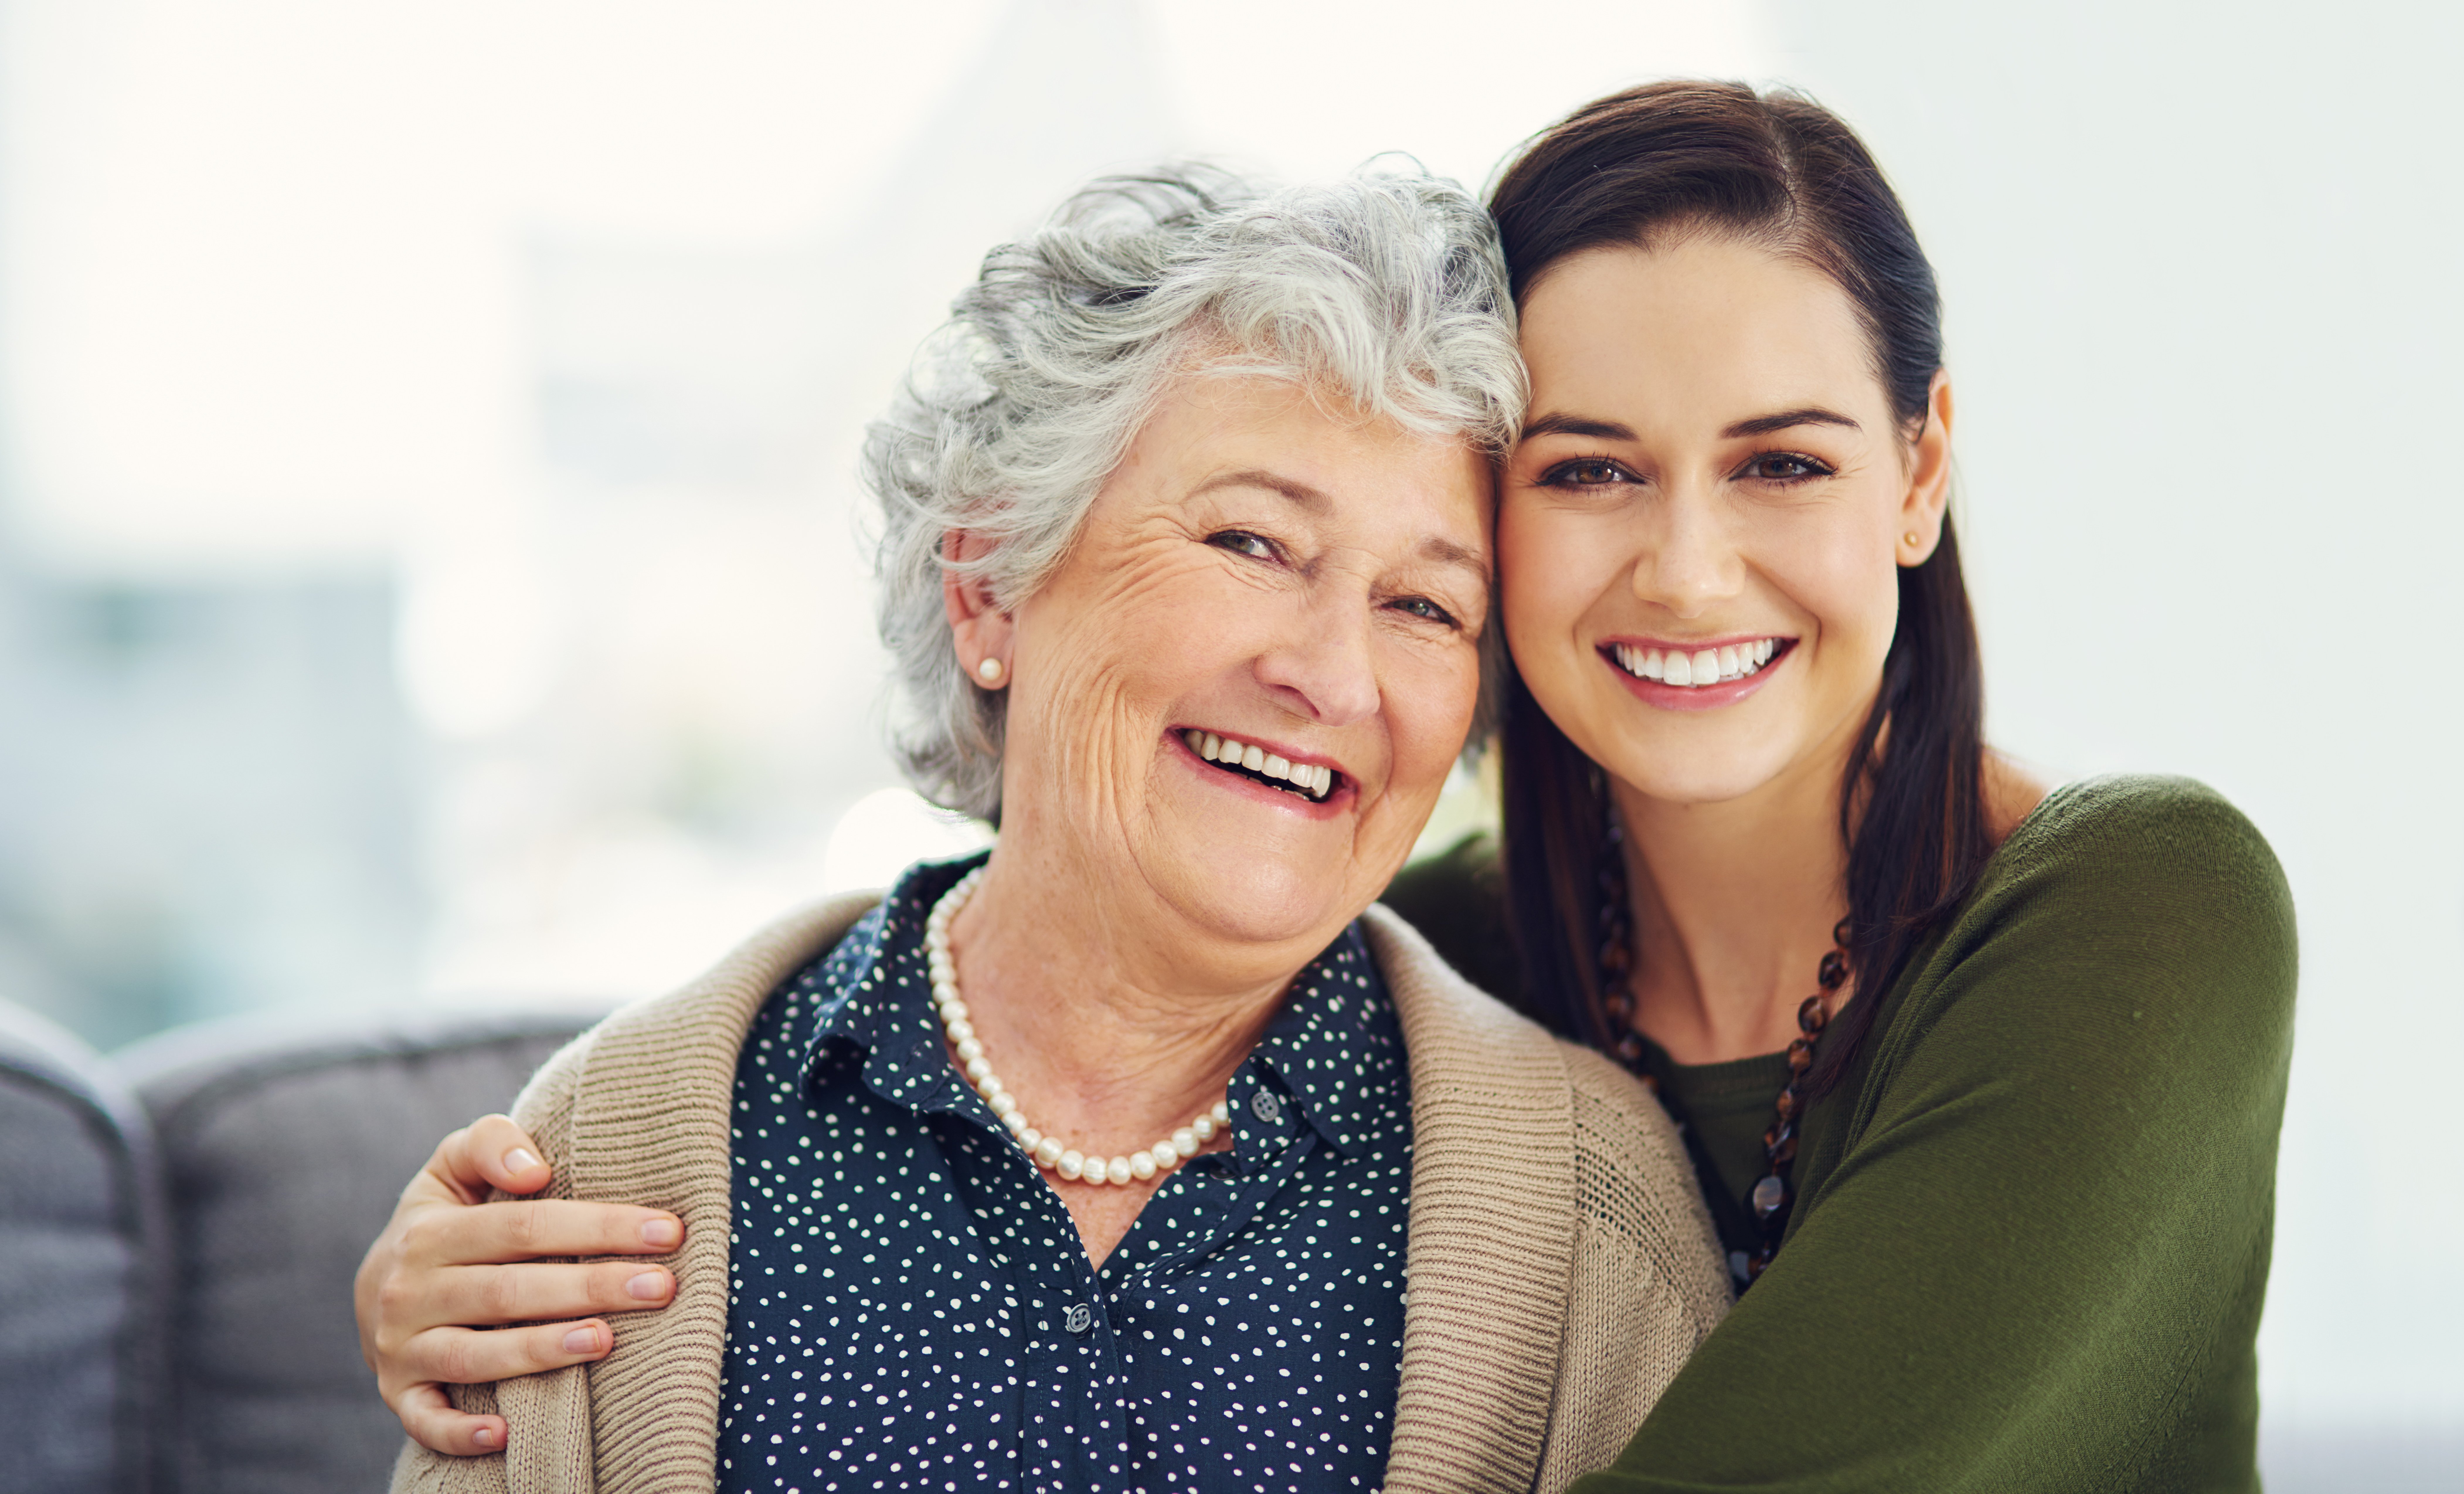 How Can I Help My Loved One With Memory Loss Adjust to Memory Care?